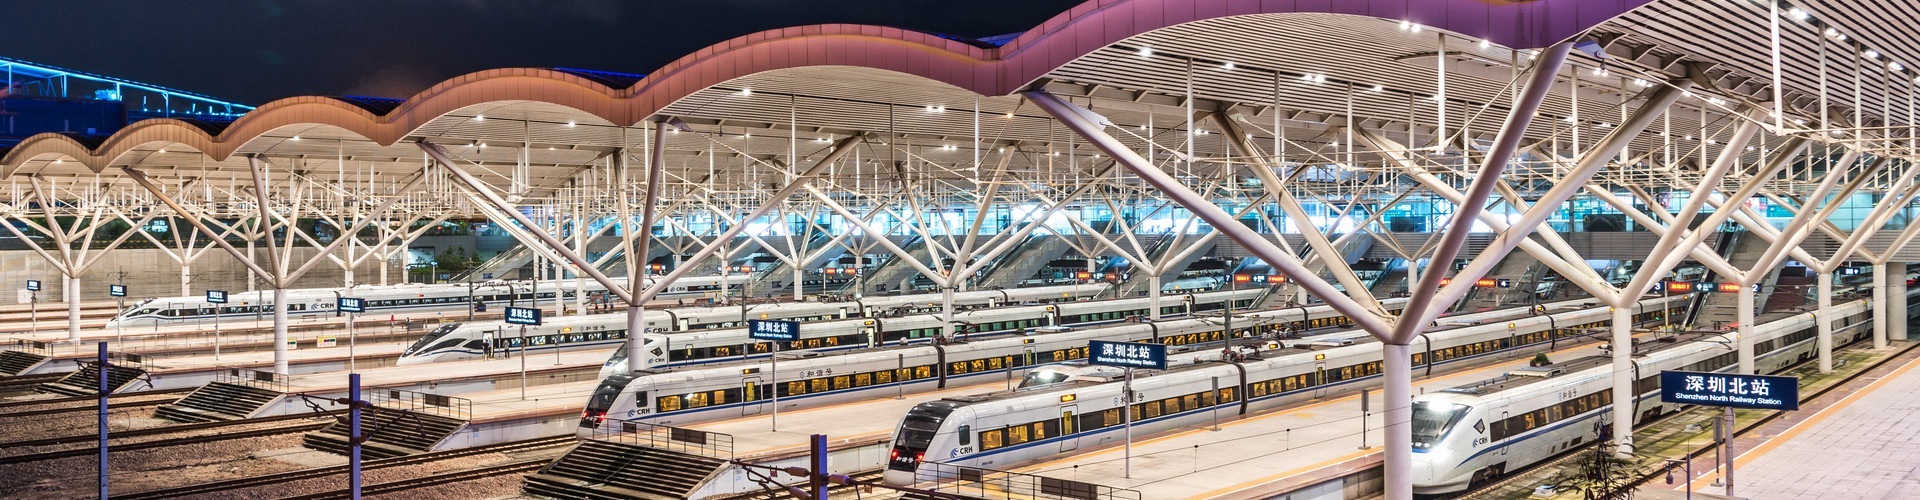 Everything You Need to Know about China’s High-Speed Trains